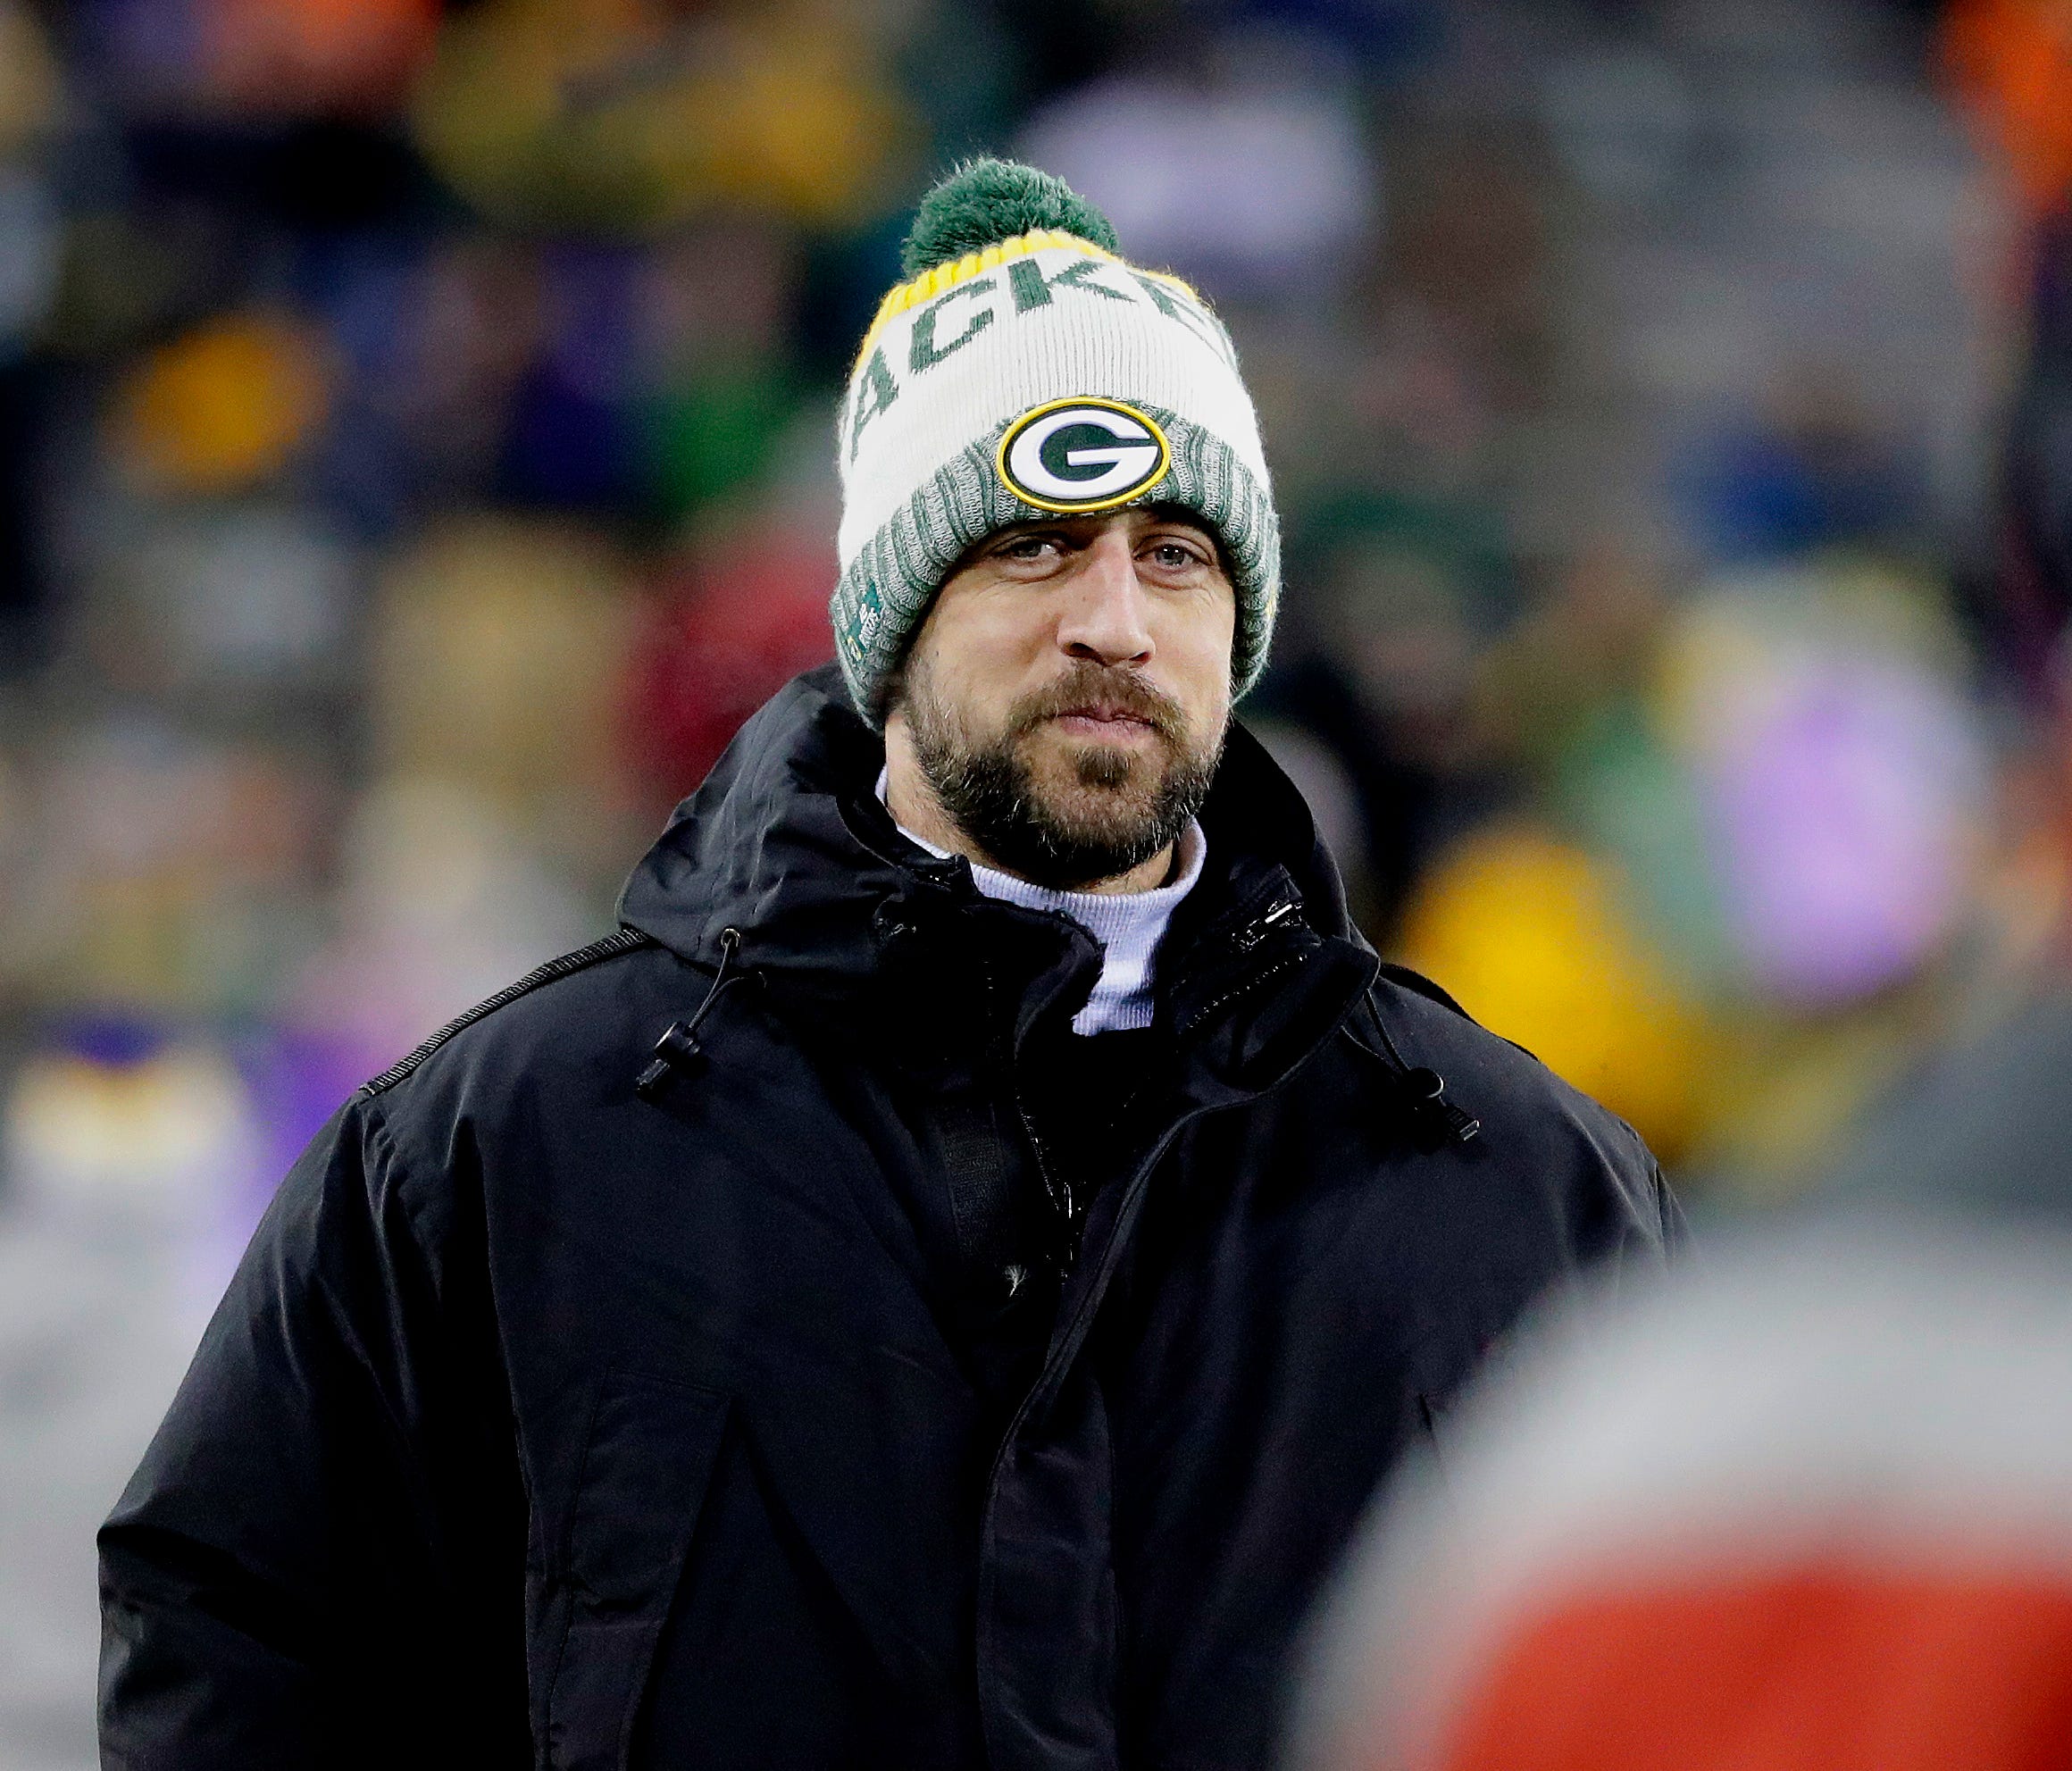 Green Bay Packers quarterback Aaron Rodgers watches from the sideline before the game against Minnesota.